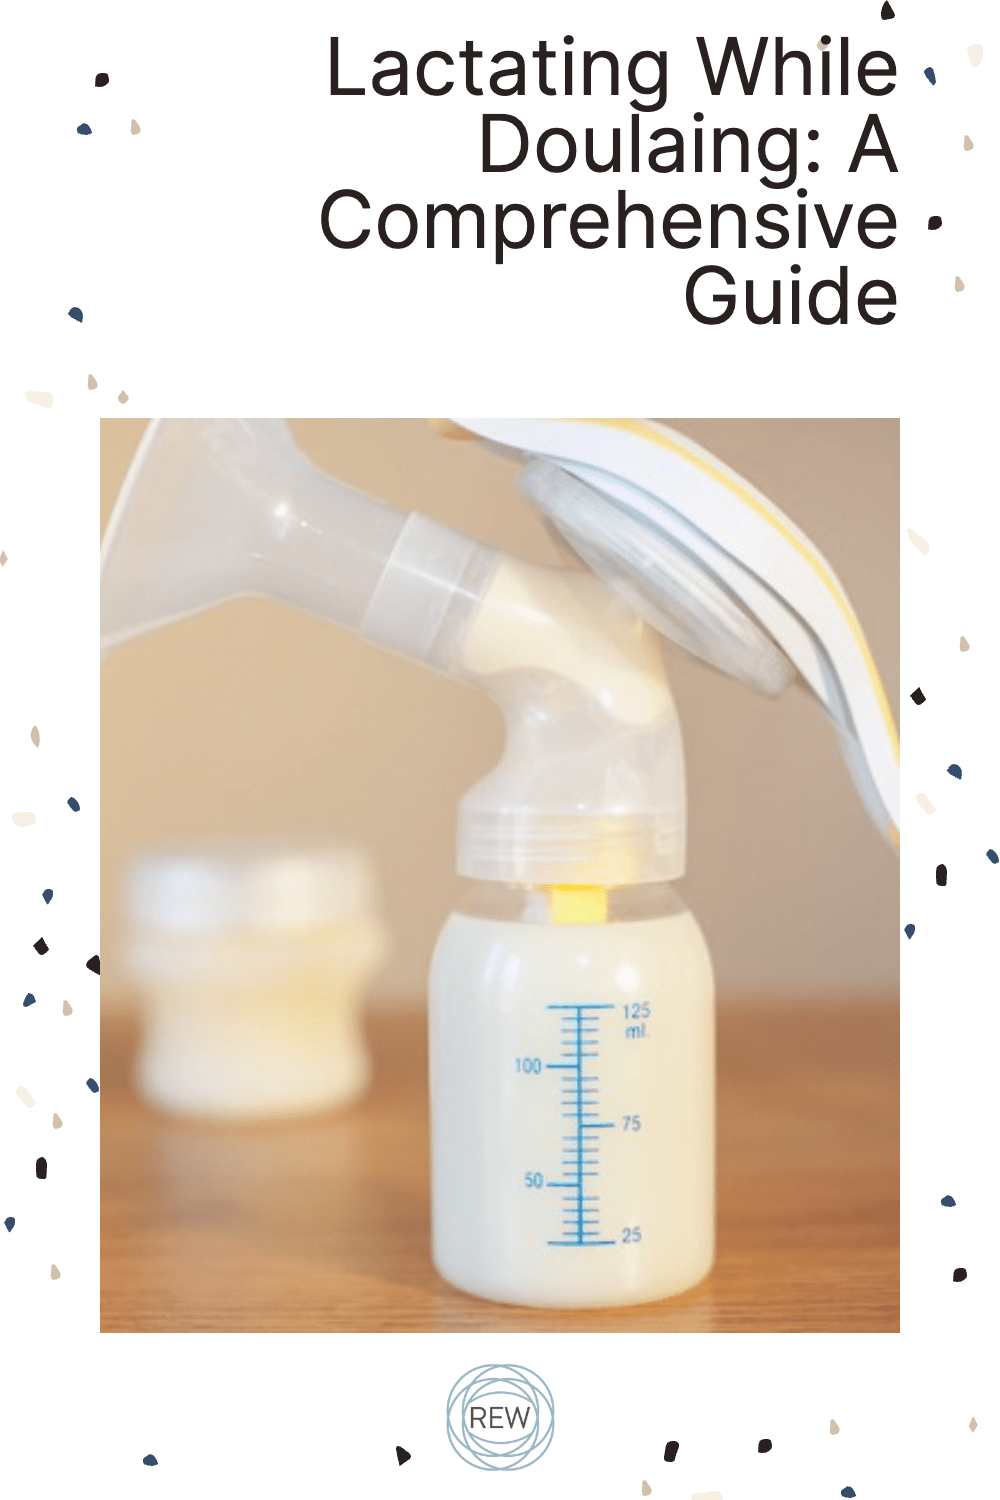 A Comprehensive Guide for Lactating Doulas.